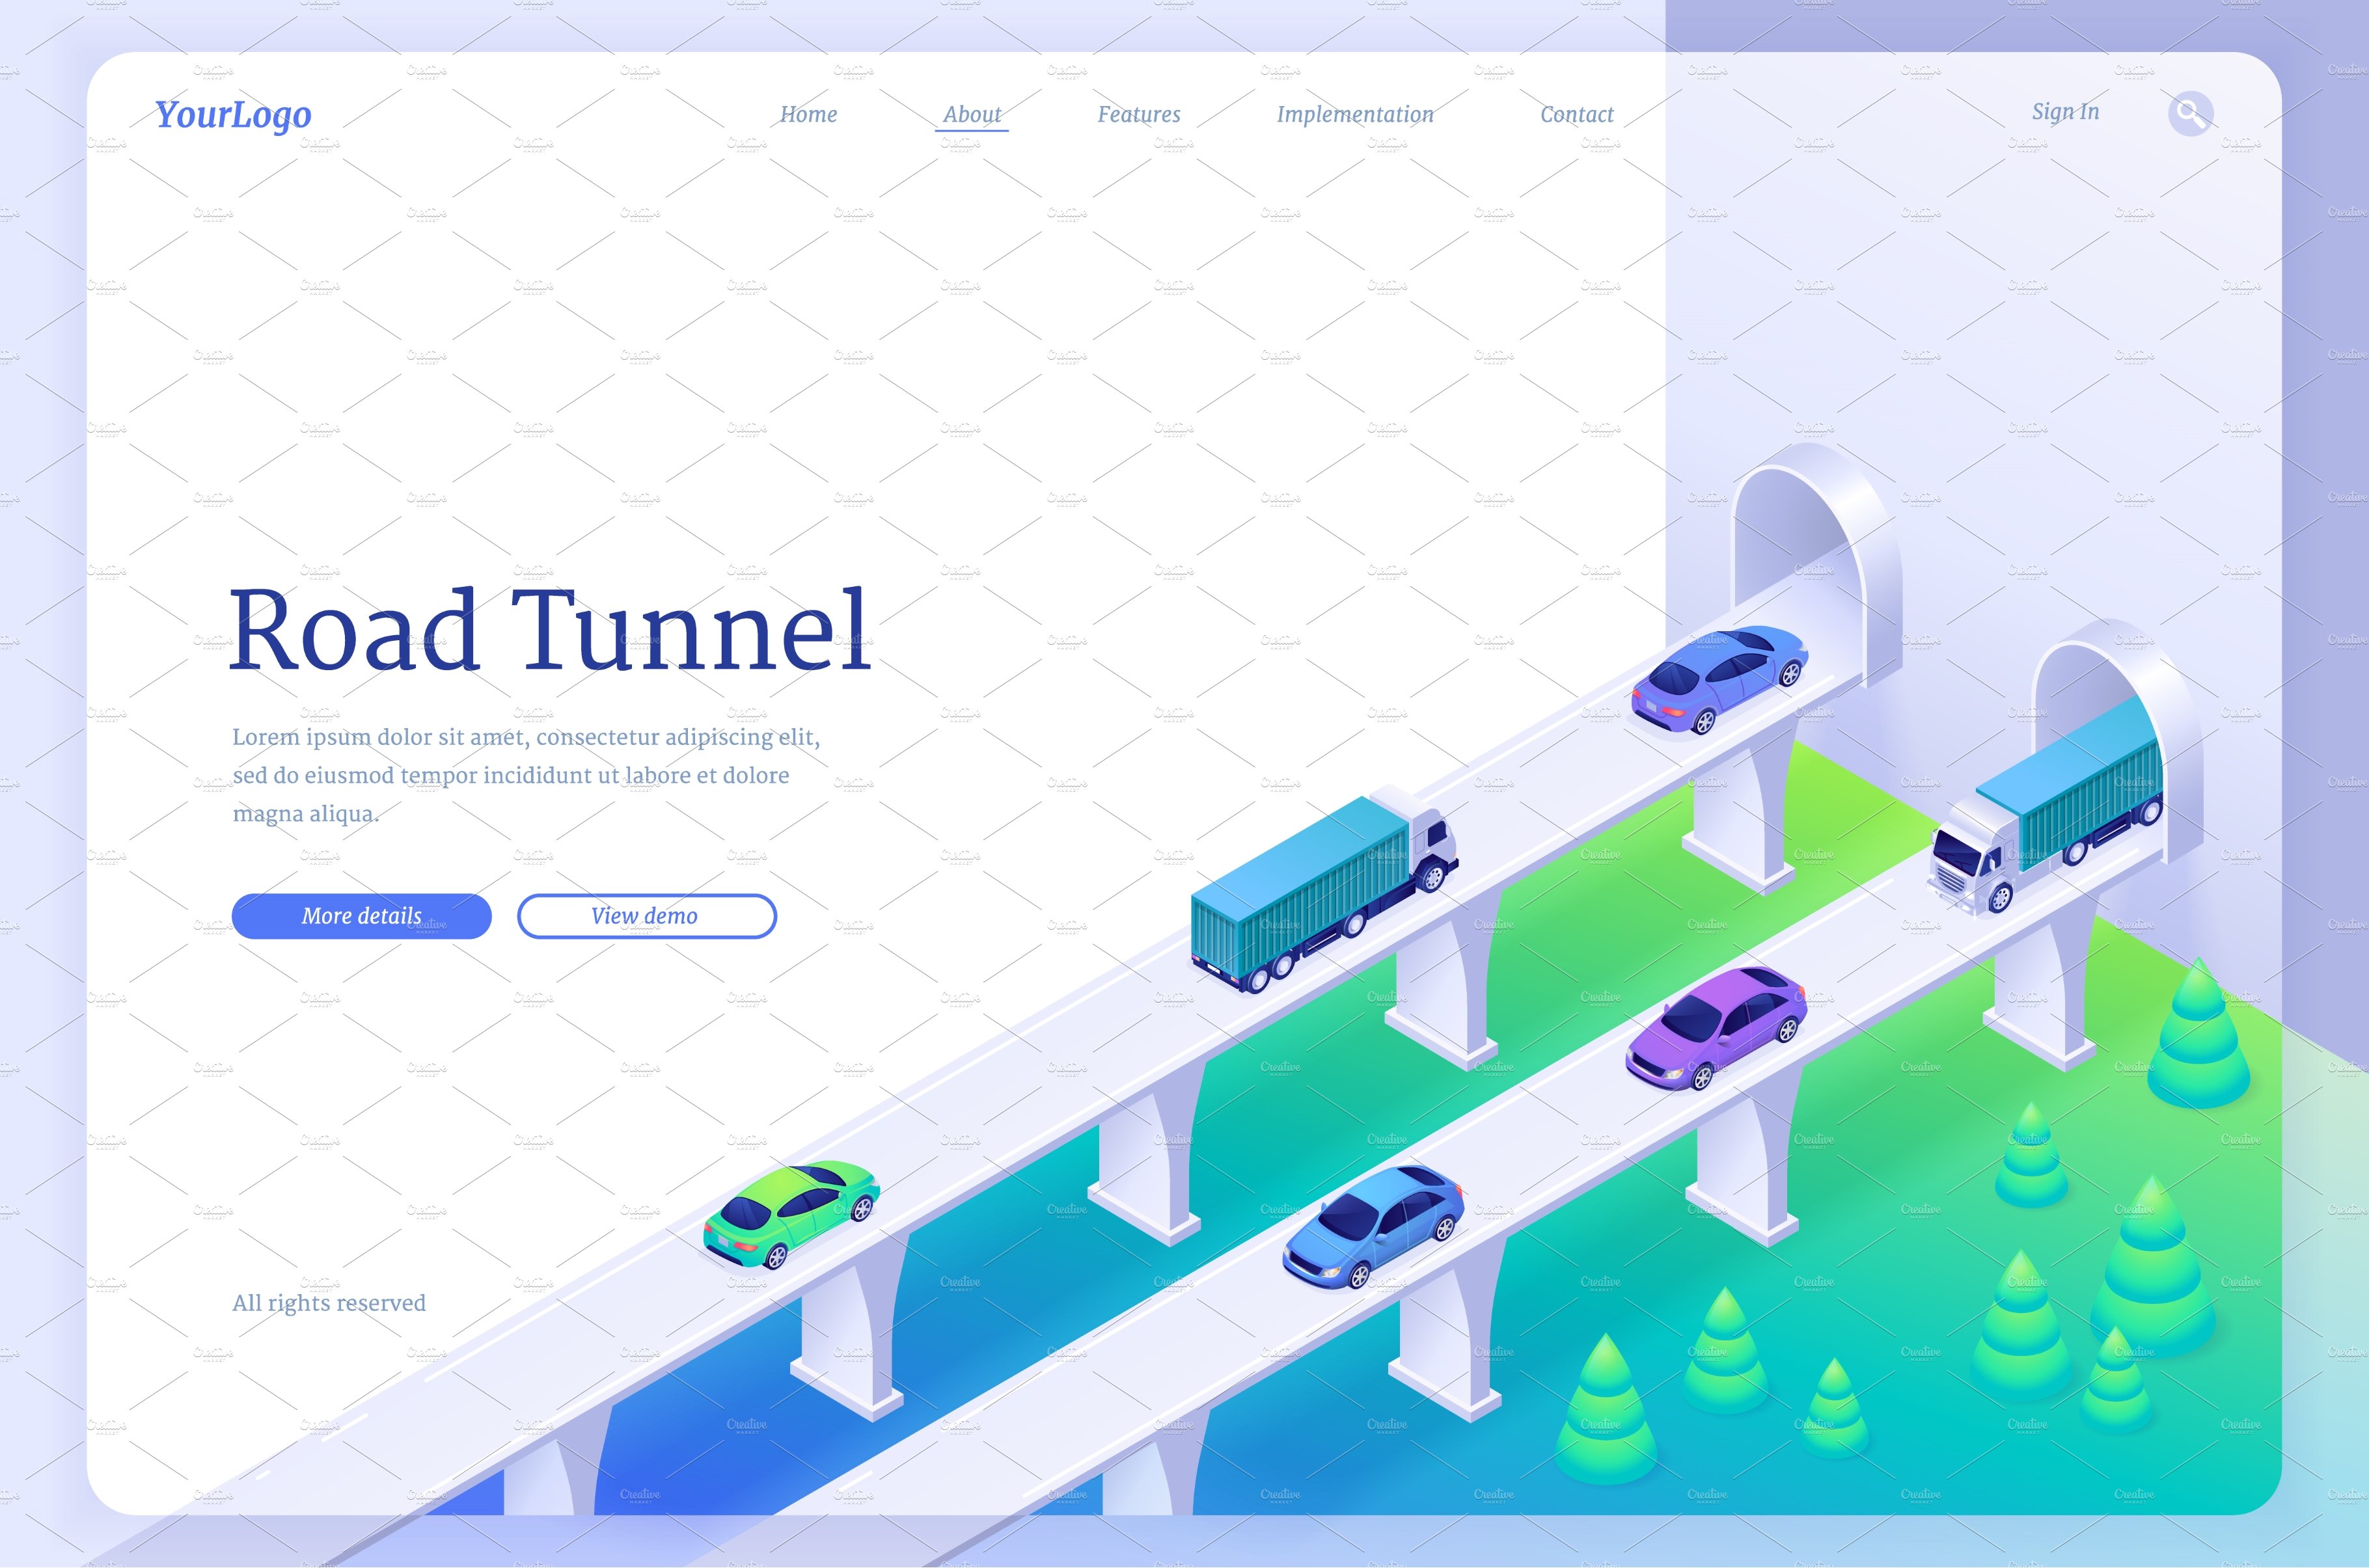 Road tunnel banner with car traffic cover image.